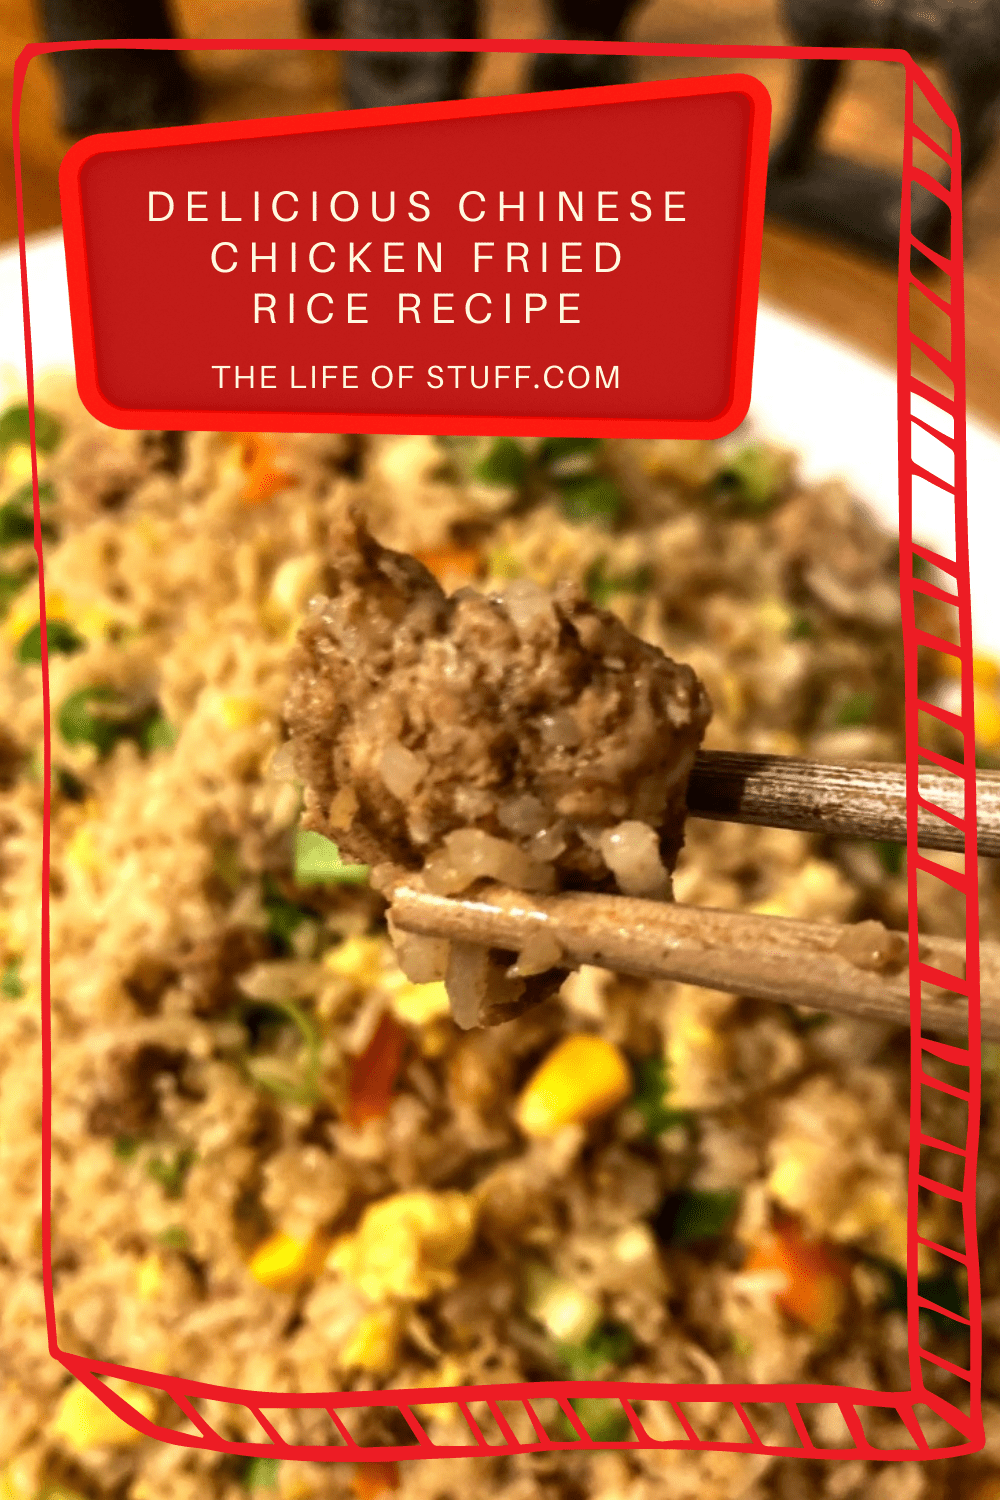 8 Steps to a Delicious Chinese Chicken Fried Rice Recipe - The Life of Stuff